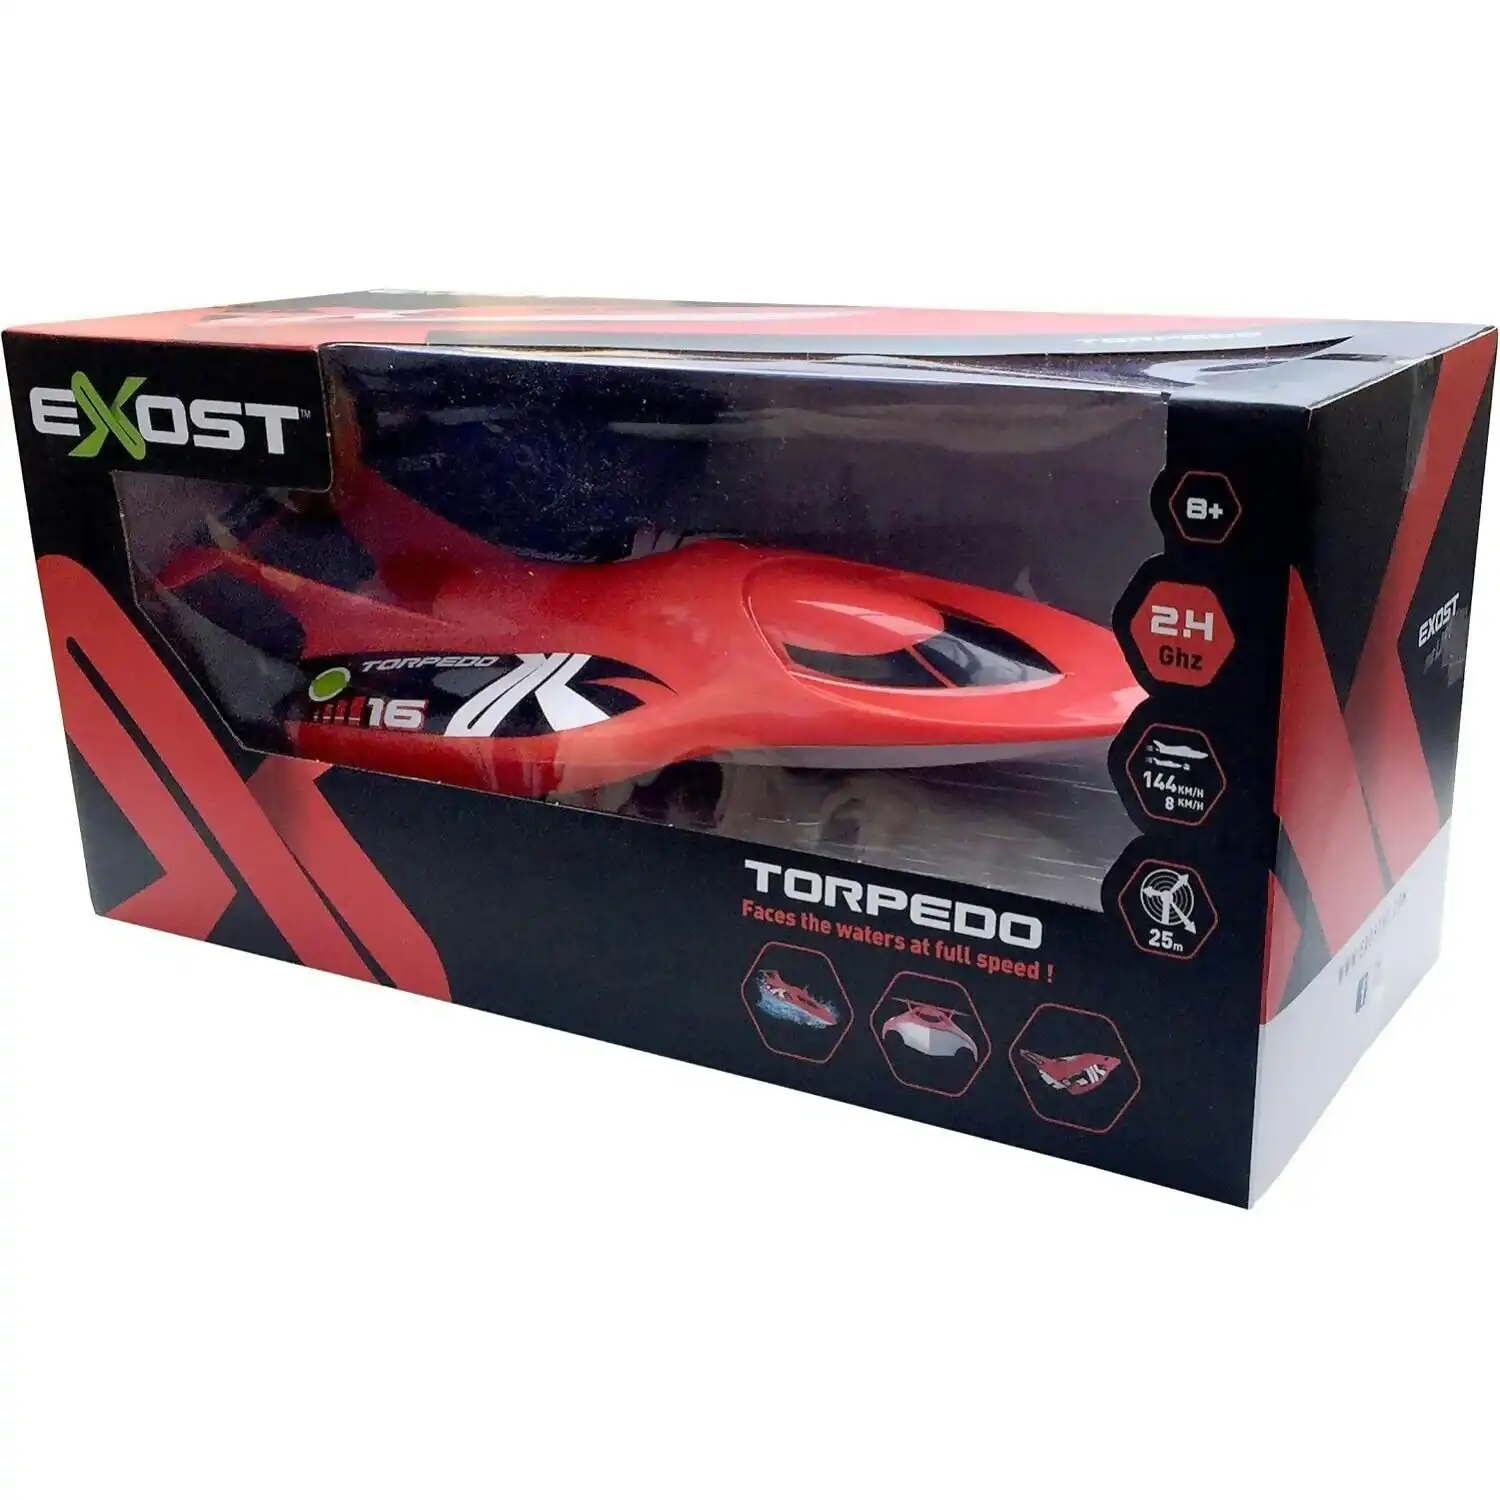 Silverlit - Exost Remote Controlled Car - Torpedo - Remote Controlled Boat - Red - Toy Scale 1:18